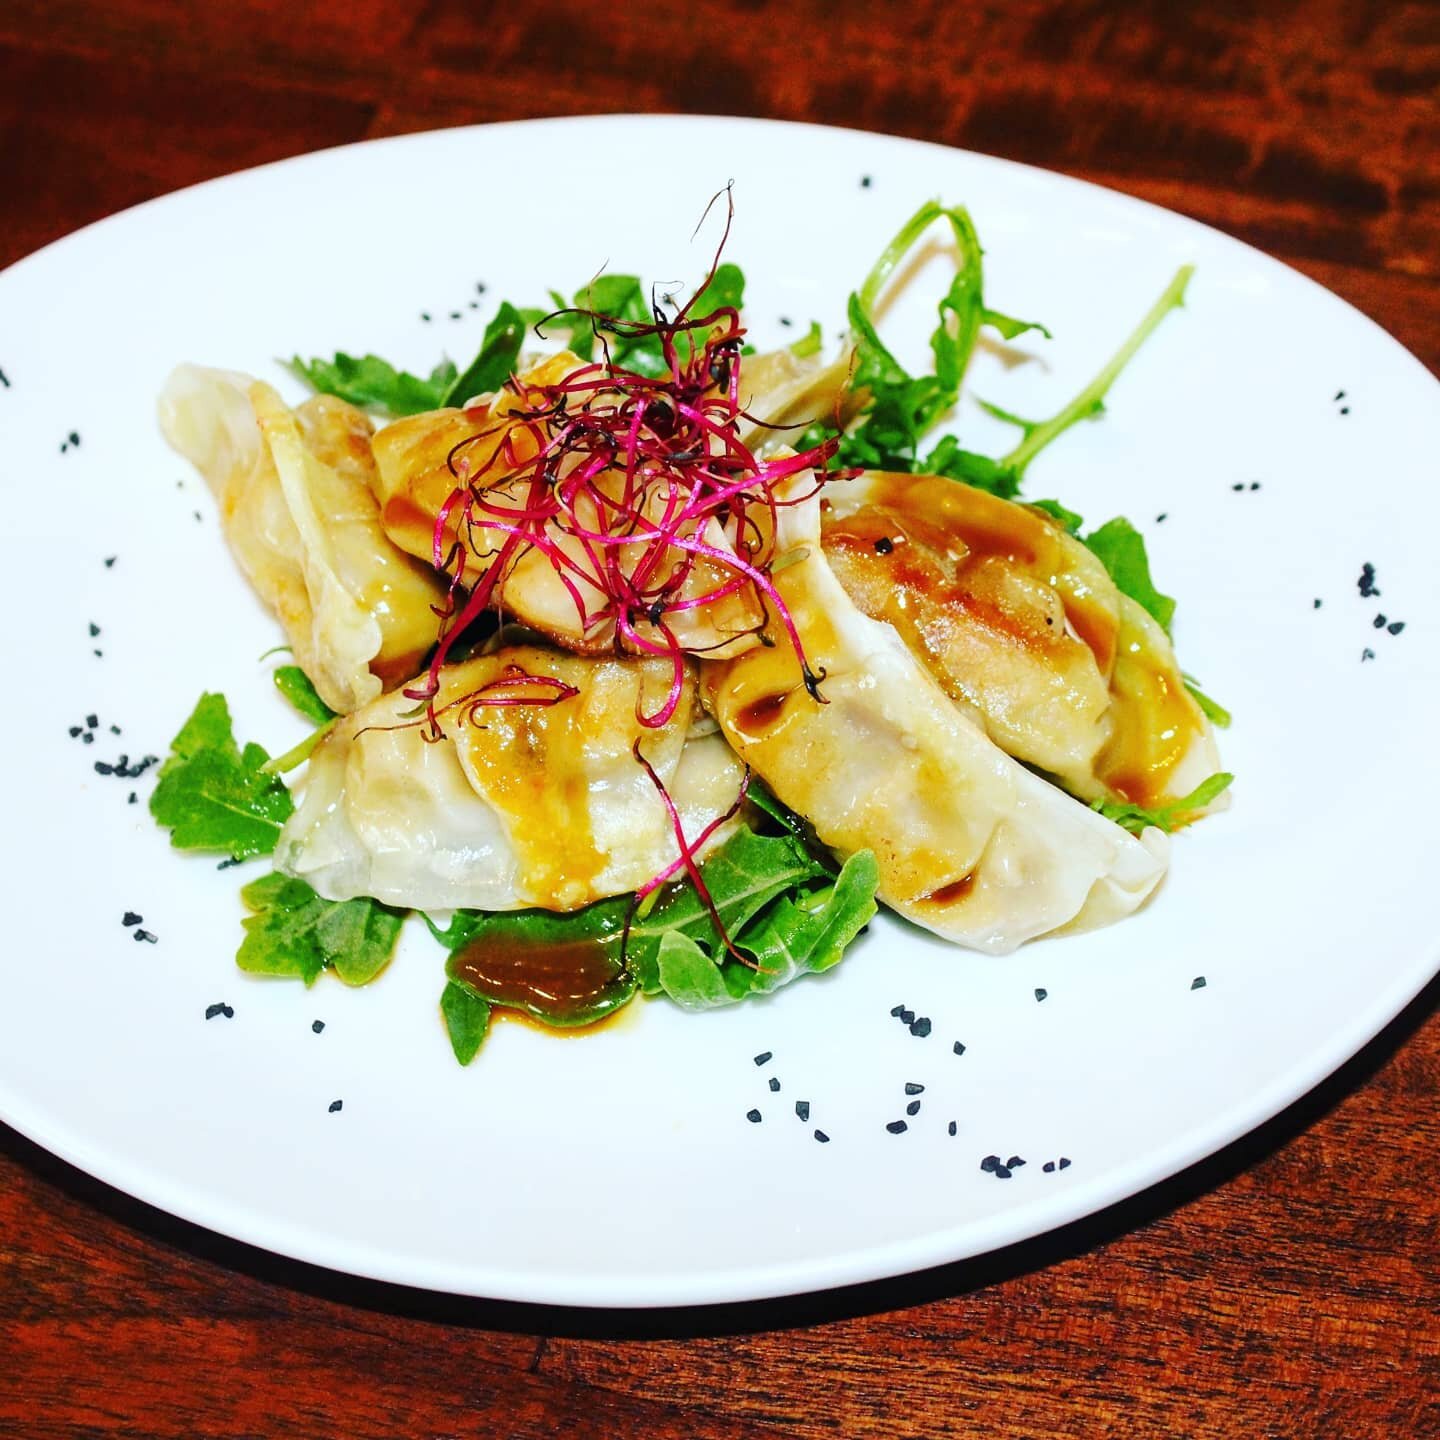 Did something different: Japanese duck gyoza with baby arugula, orange soy reduction sauce 
Beets sprouts for garnish 

#personalchef #hautecuisines #finedining #foodies #foodieaofinstagram #foodgasm #westpalmbeach #westpalmfood #southflorida #southf